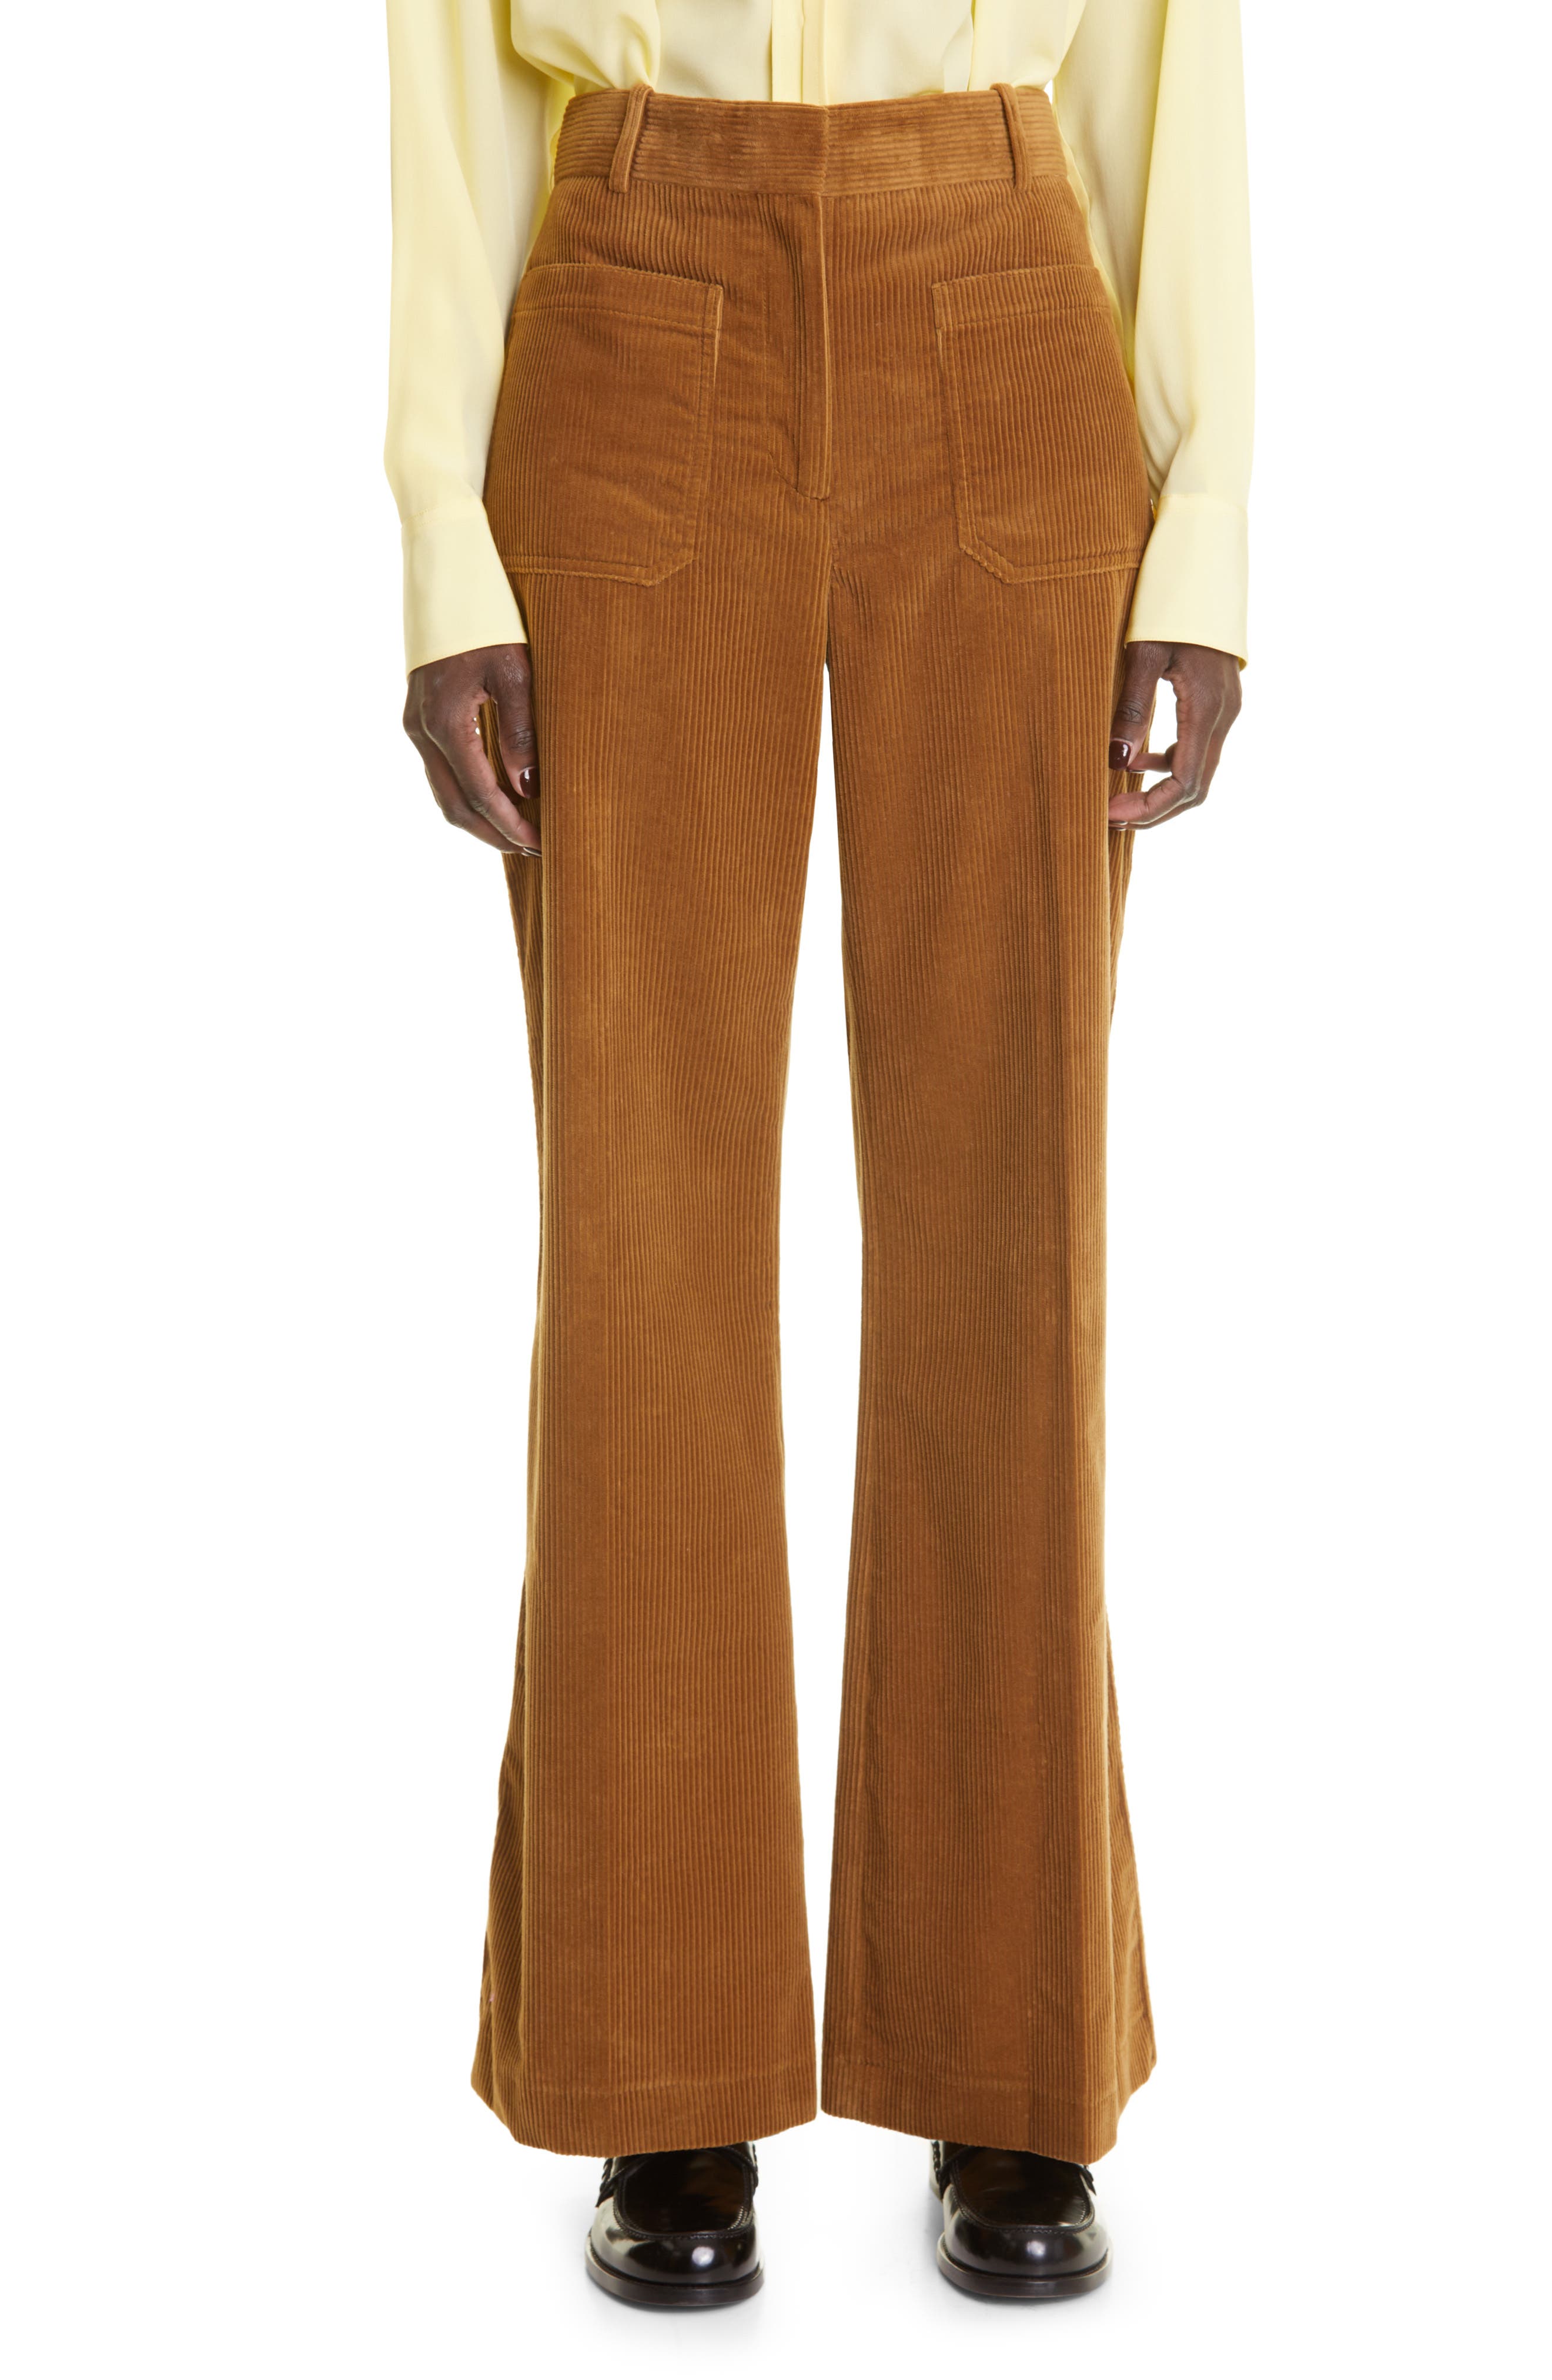 Victoria Beckham Alina Patch Pocket Cotton Corduroy Trousers in Camel